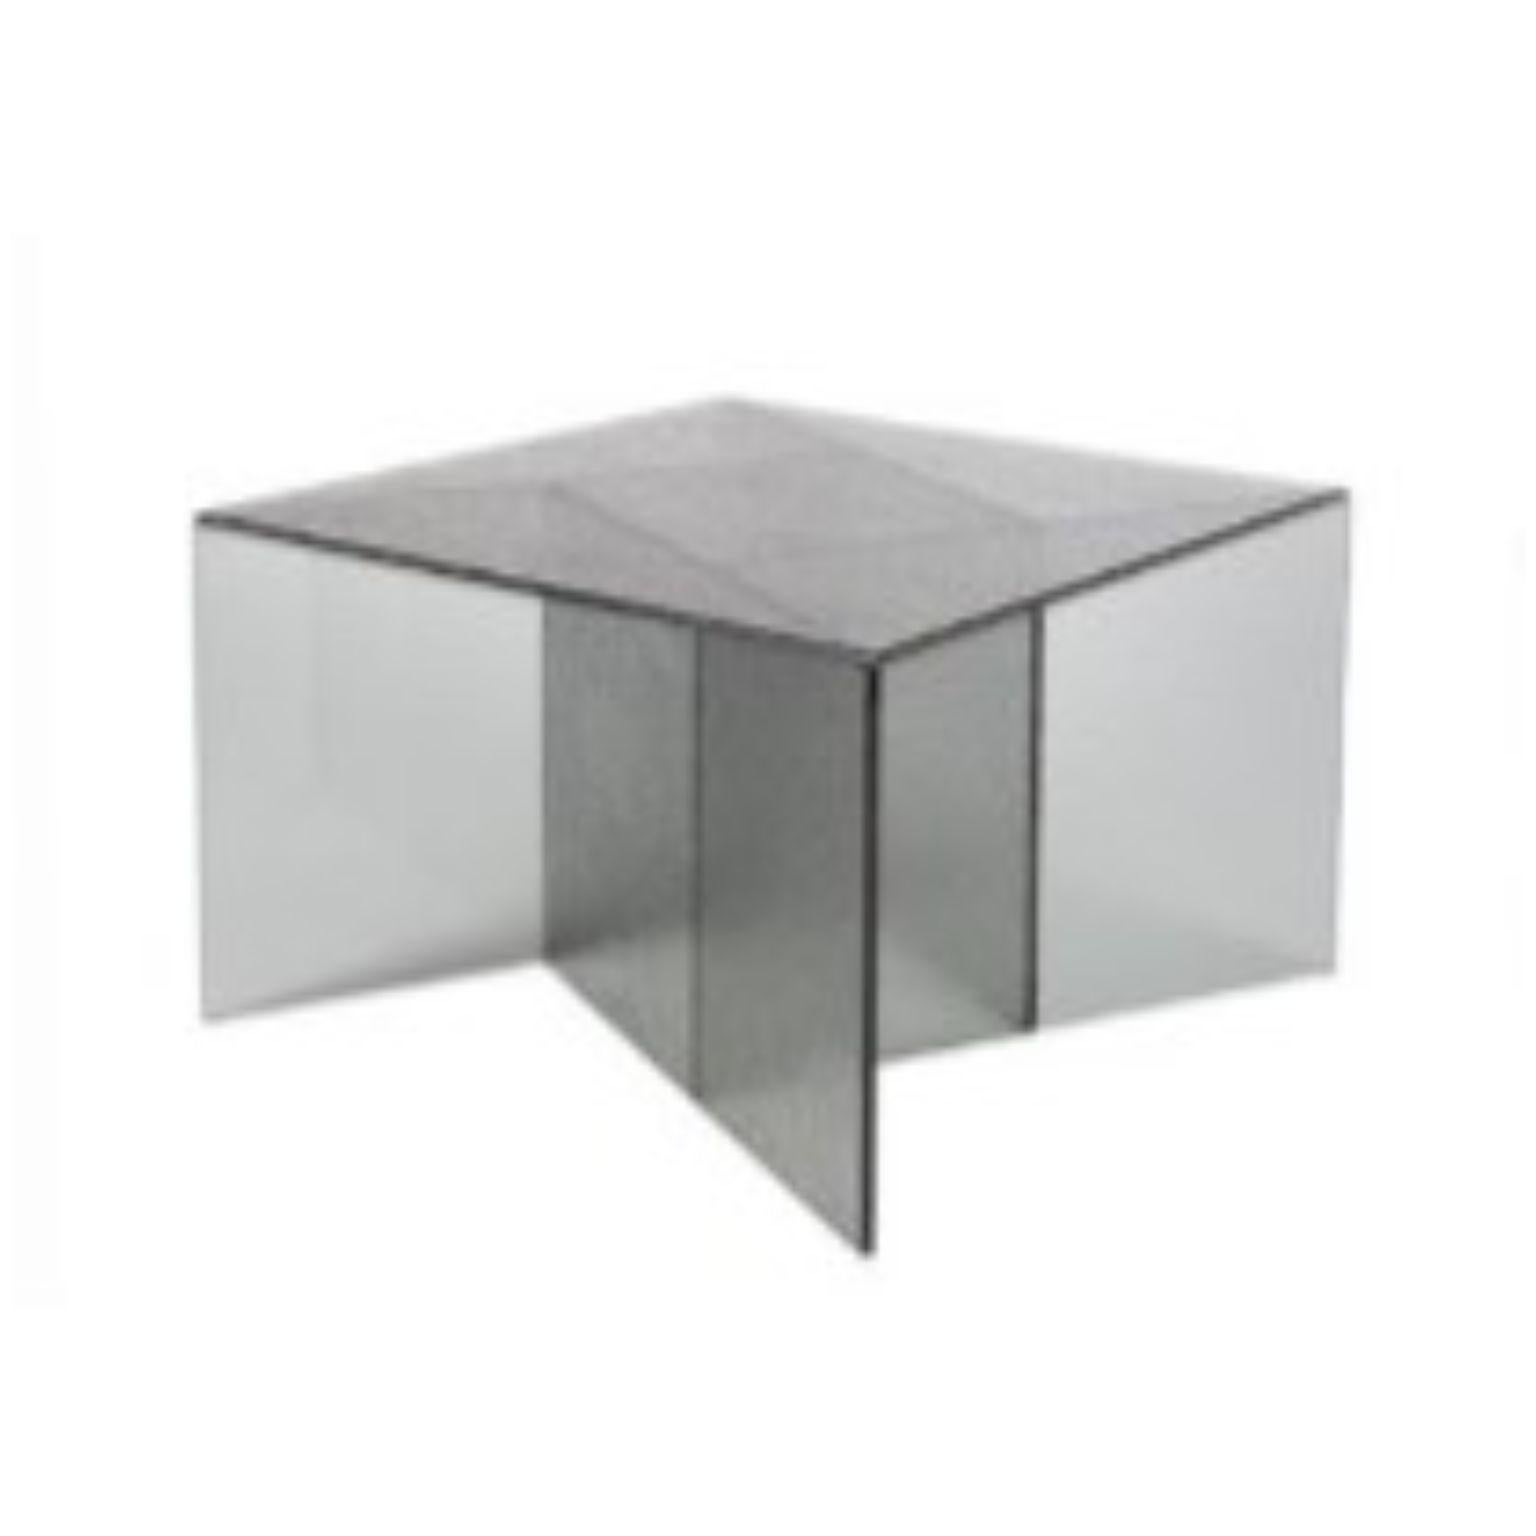 Aspa medium grey coffee table by Pulpo
Dimensions: D60 x W60 x H40 cm
Materials: glass

Also available in different colours. 

Variety is a pleasure. Aspa, the side table concept from the Spanish design studio MUT, is a simple study in